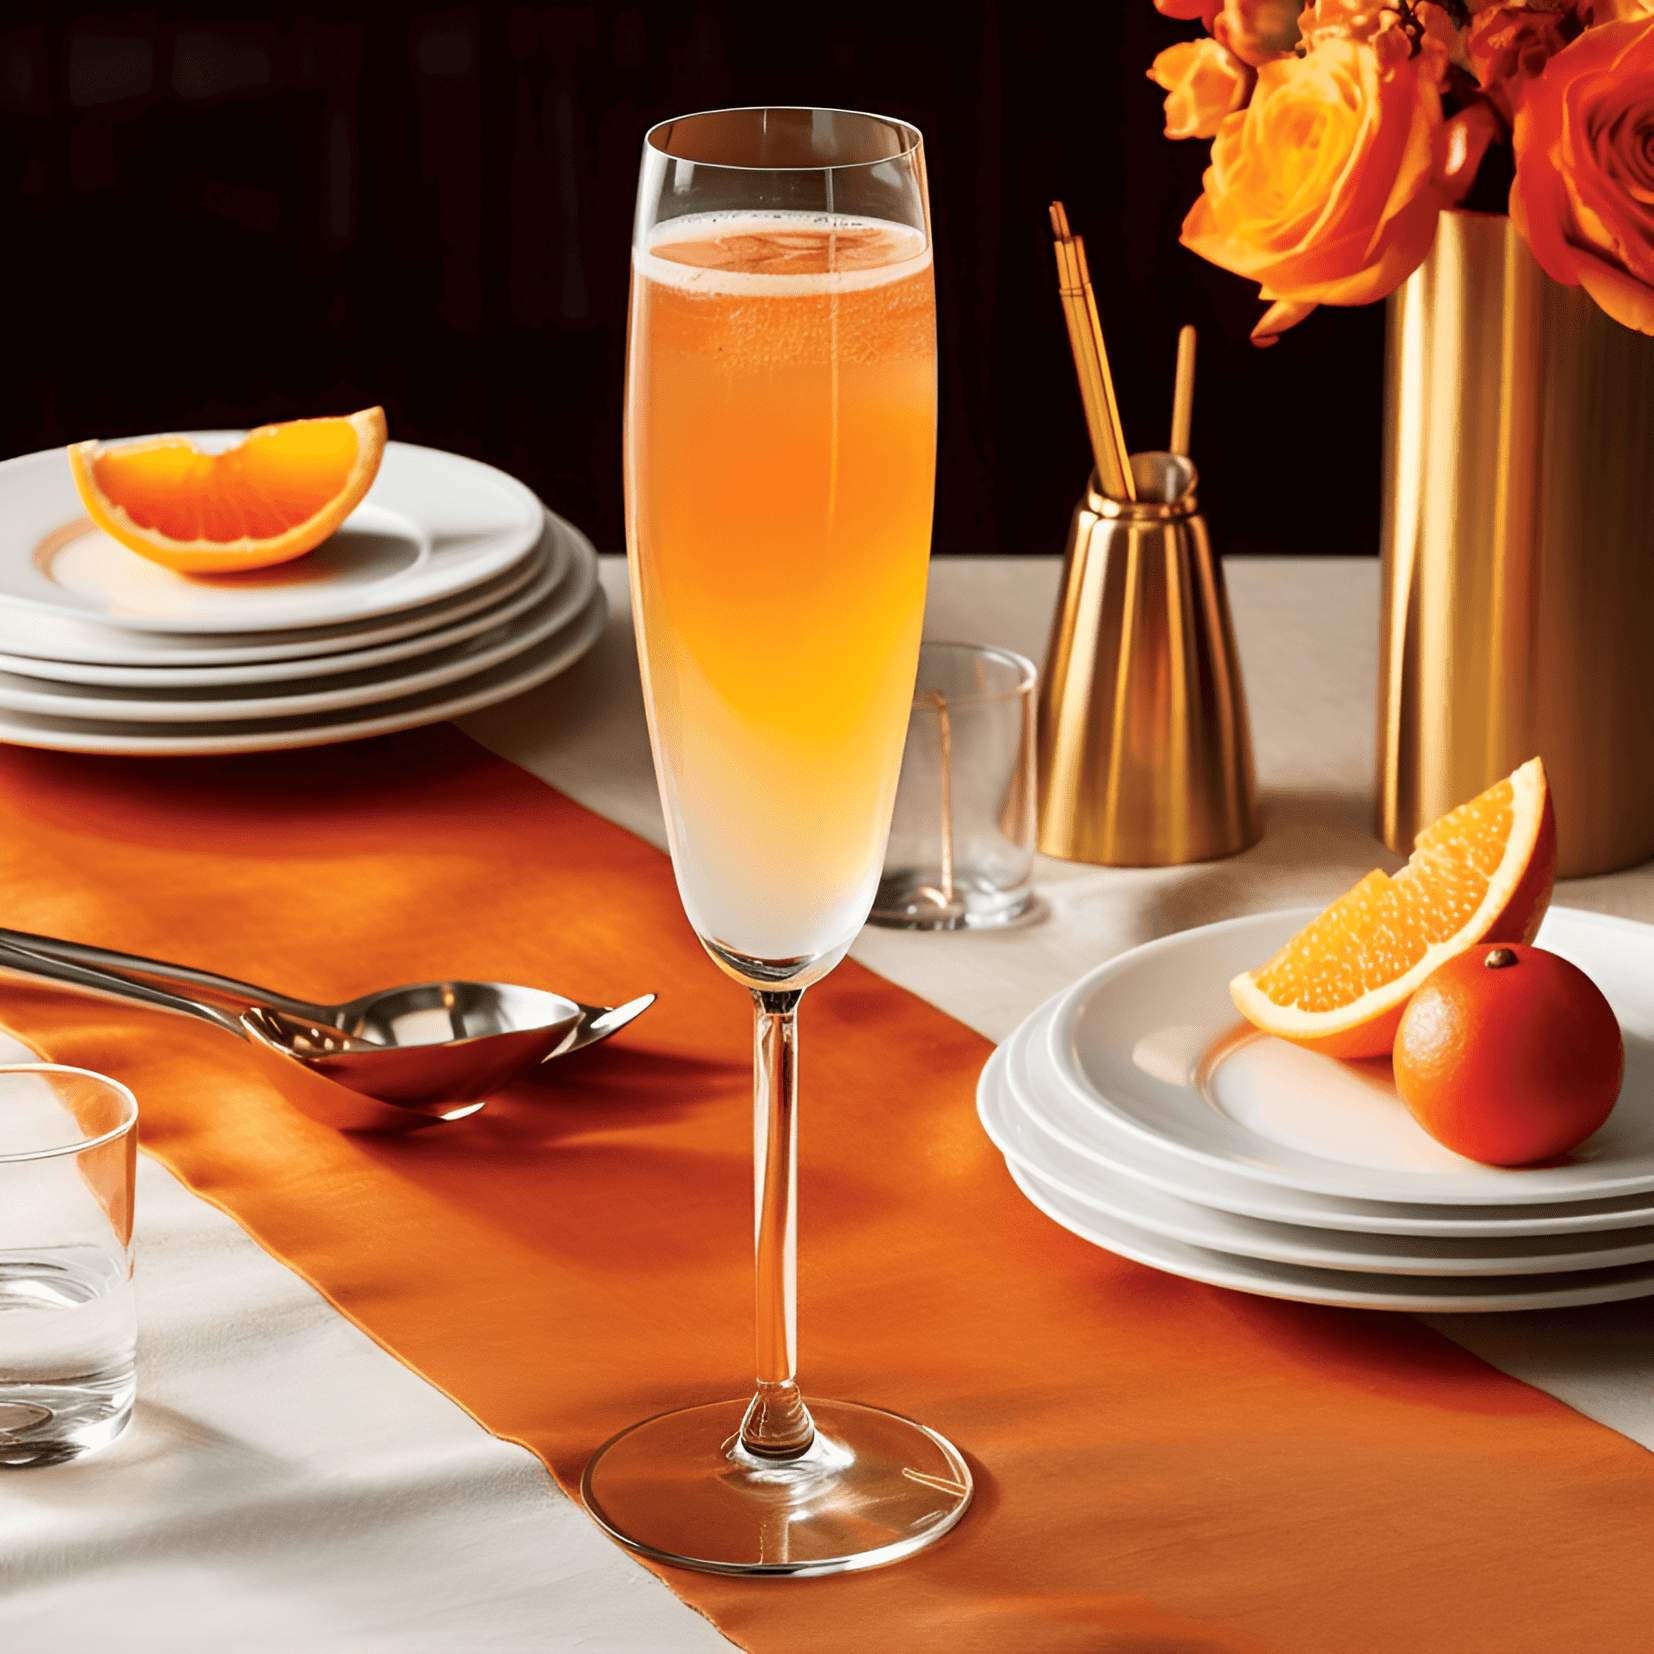 Buck's Fizz Cocktail Recipe - Buck's Fizz is a light, refreshing, and slightly sweet cocktail. The combination of orange juice and Champagne gives it a fruity and bubbly taste, while the grenadine adds a touch of sweetness.